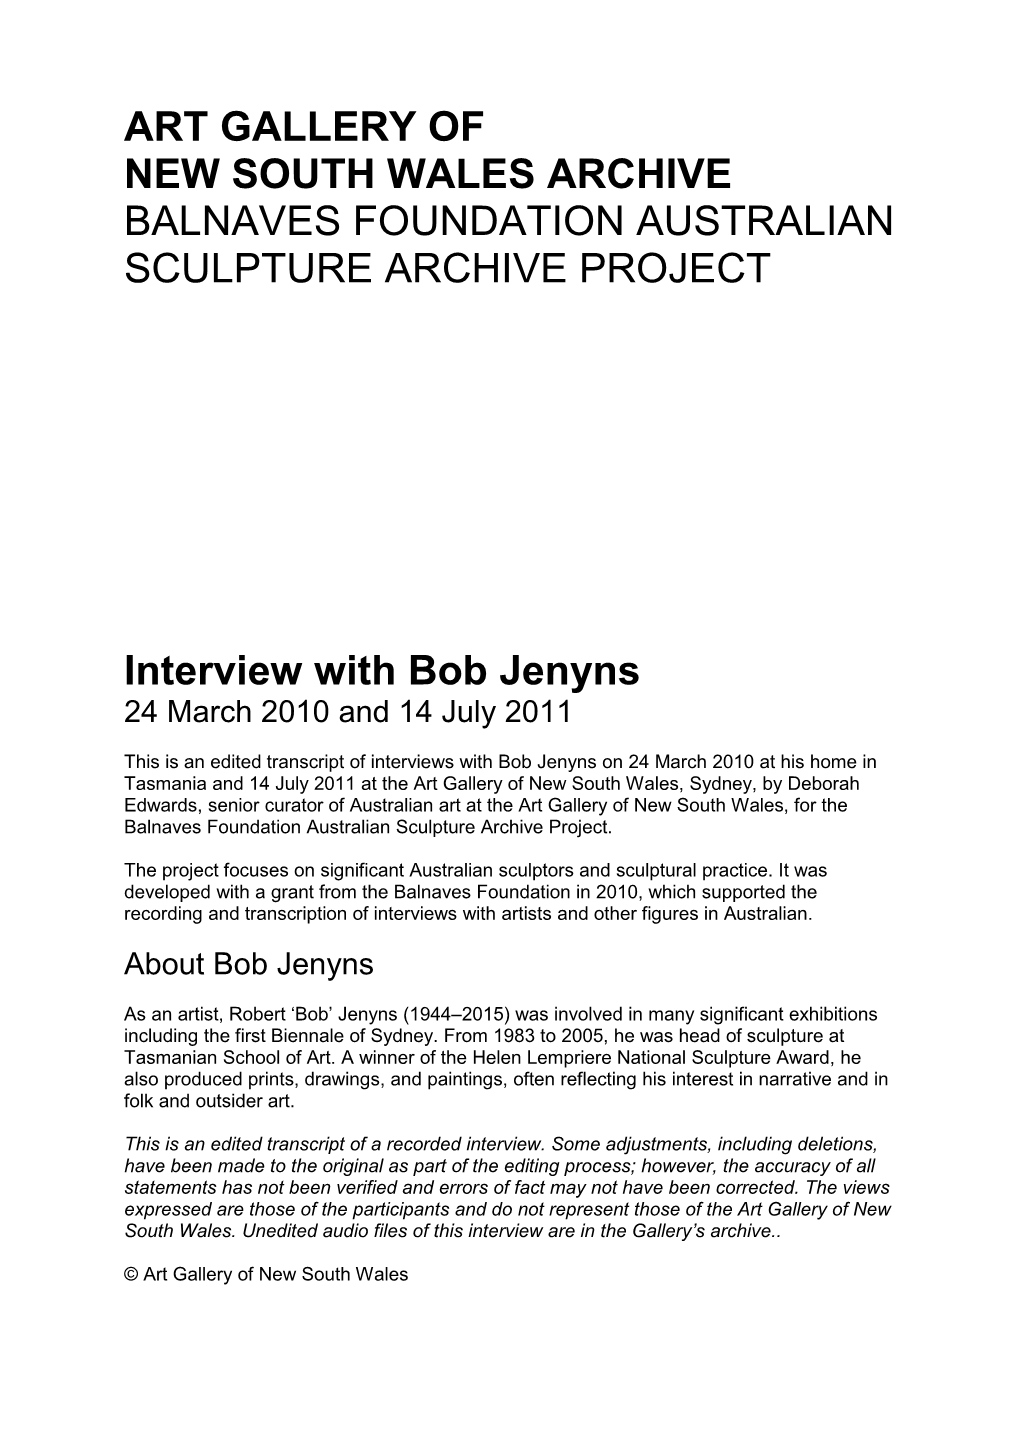 Interview with Bob Jenyns 24 March 2010 and 14 July 2011